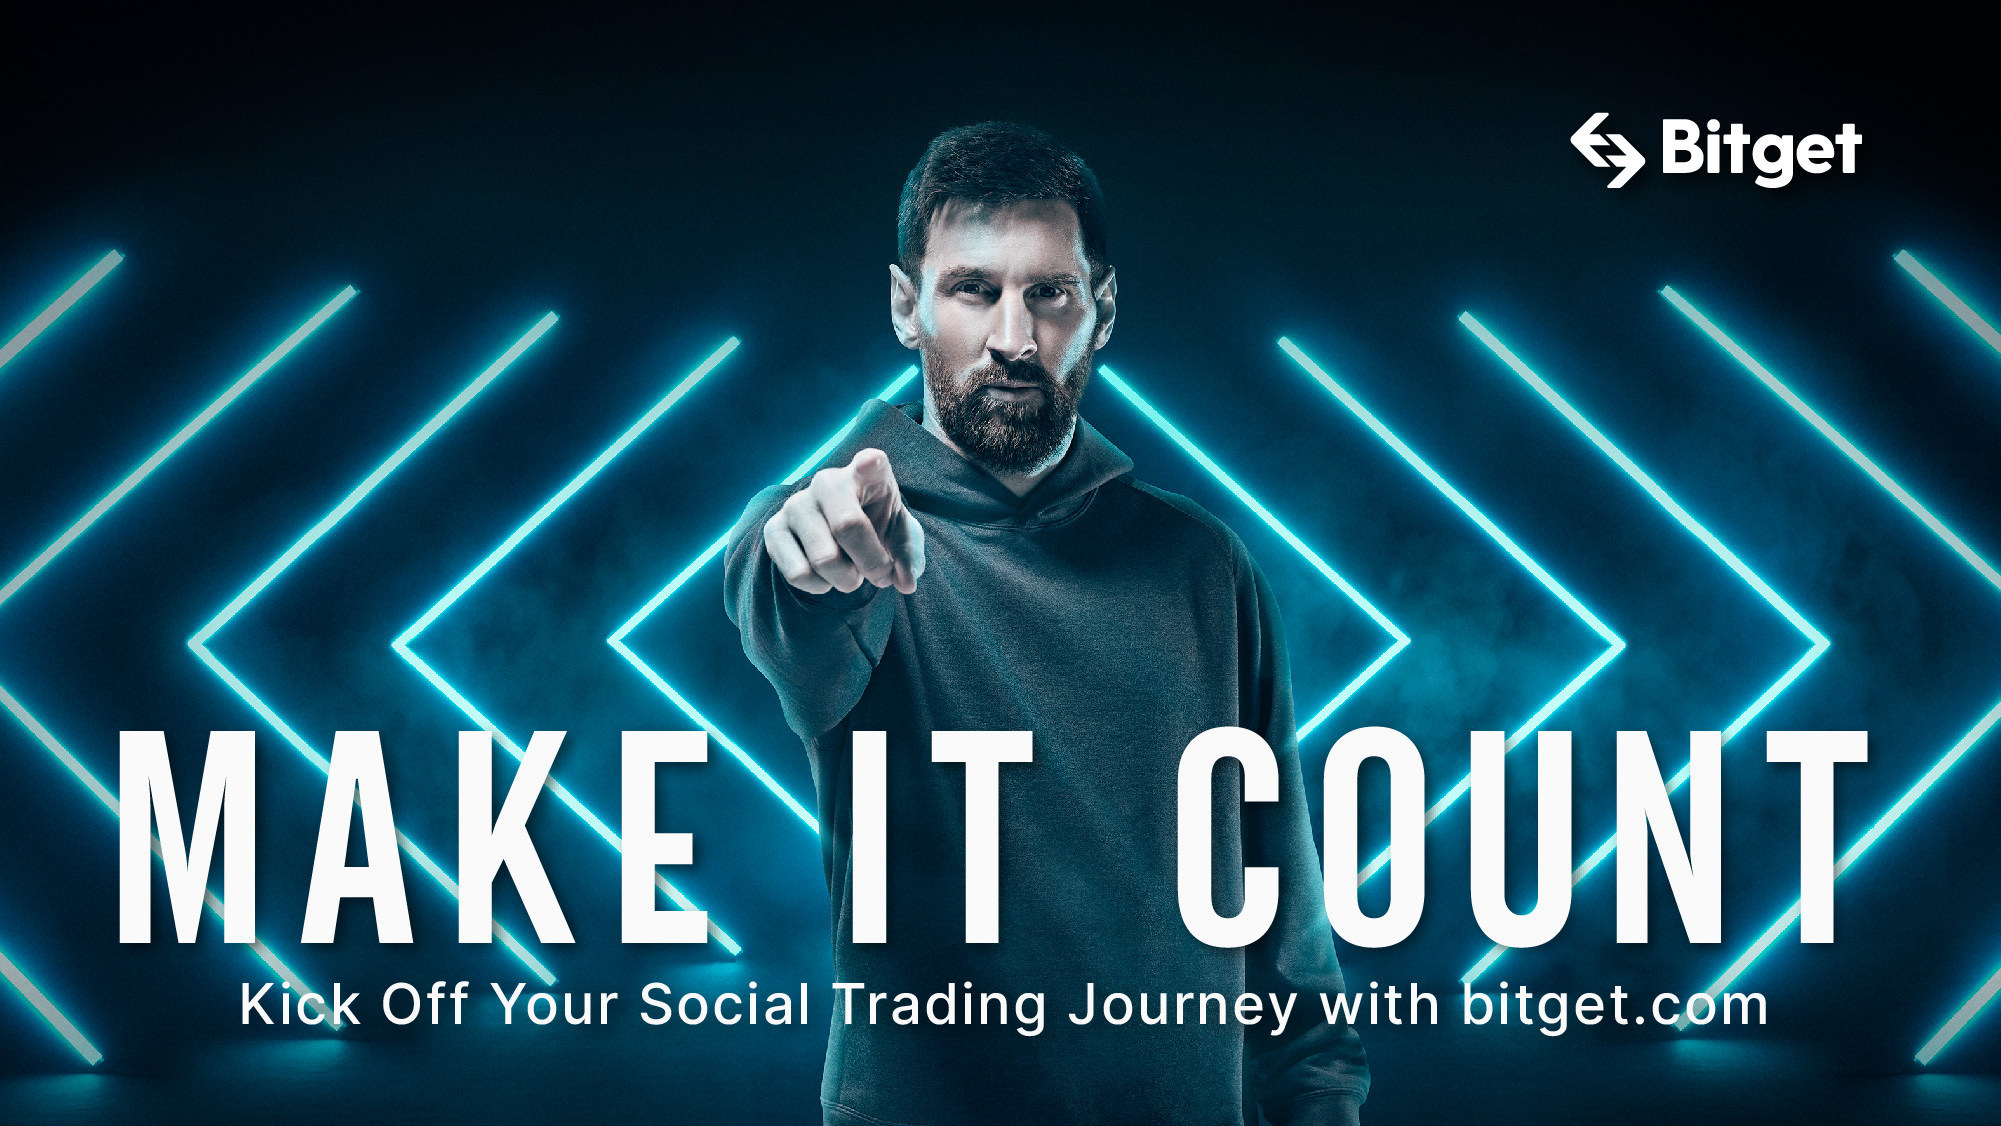 Bitget launches major campaign with Messi to reignite confidence in the crypto market